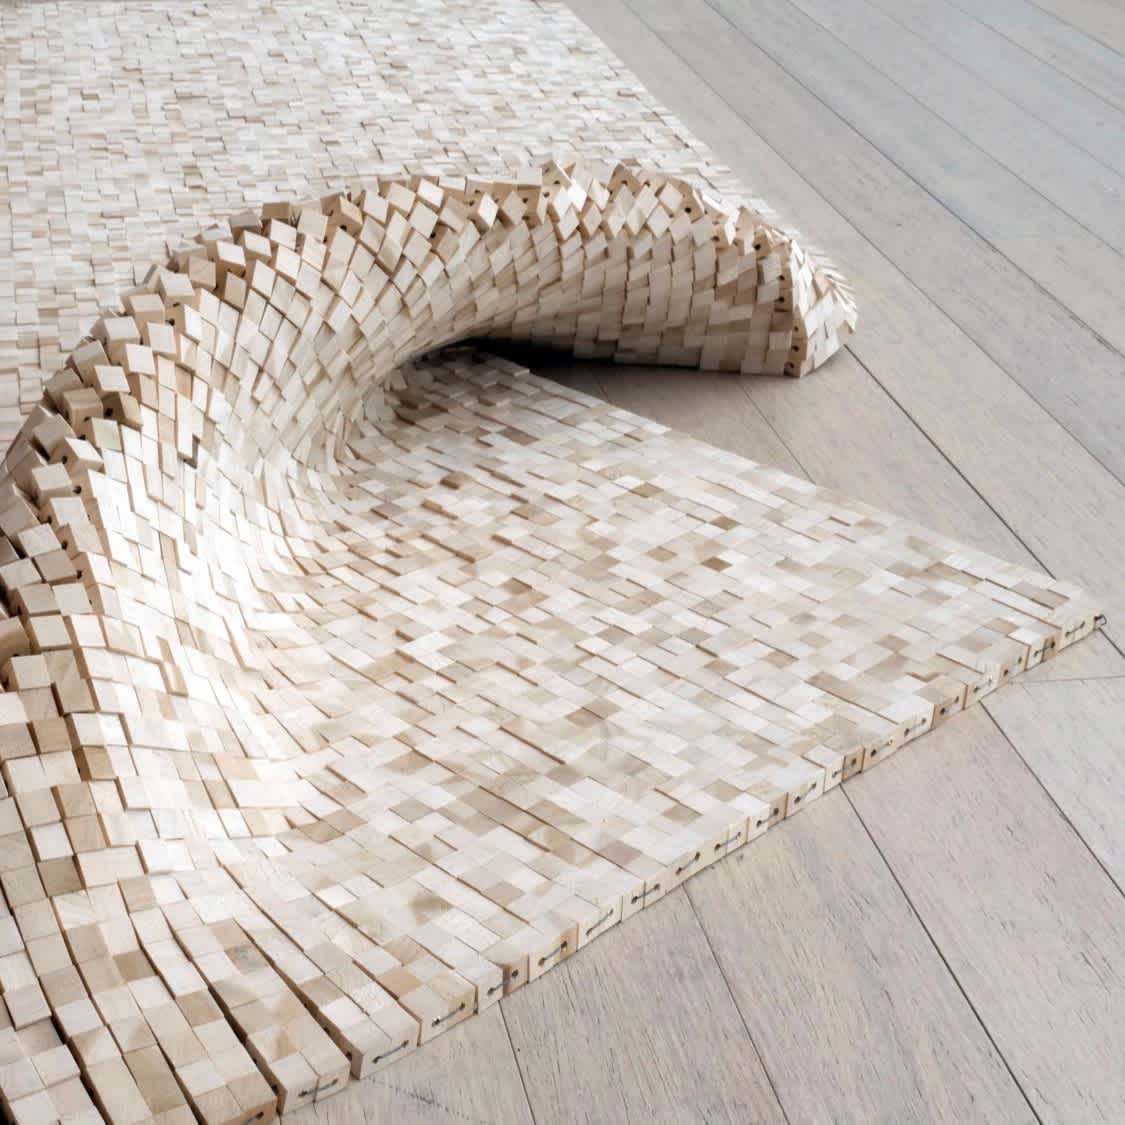 Vivian Chiu, *Blanket*, 2019. Poplar, braided string. Courtesy of the artist. From the exhibition Made in VA at Virginia Museum of Contemporary Art